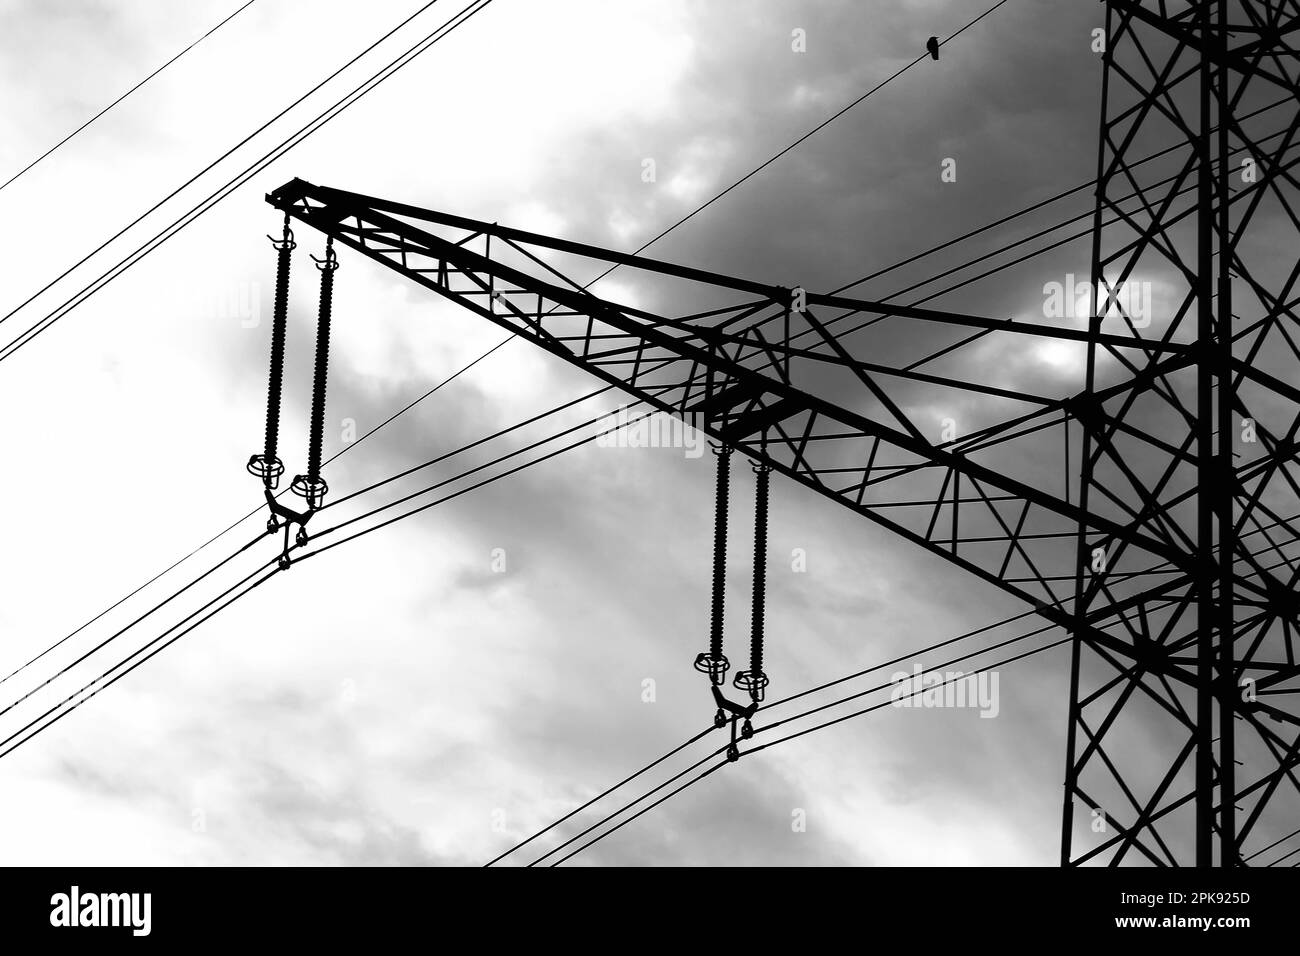 Energy crisis in Europe. Framework of power pole with single bird sitting on power supply line Stock Photo